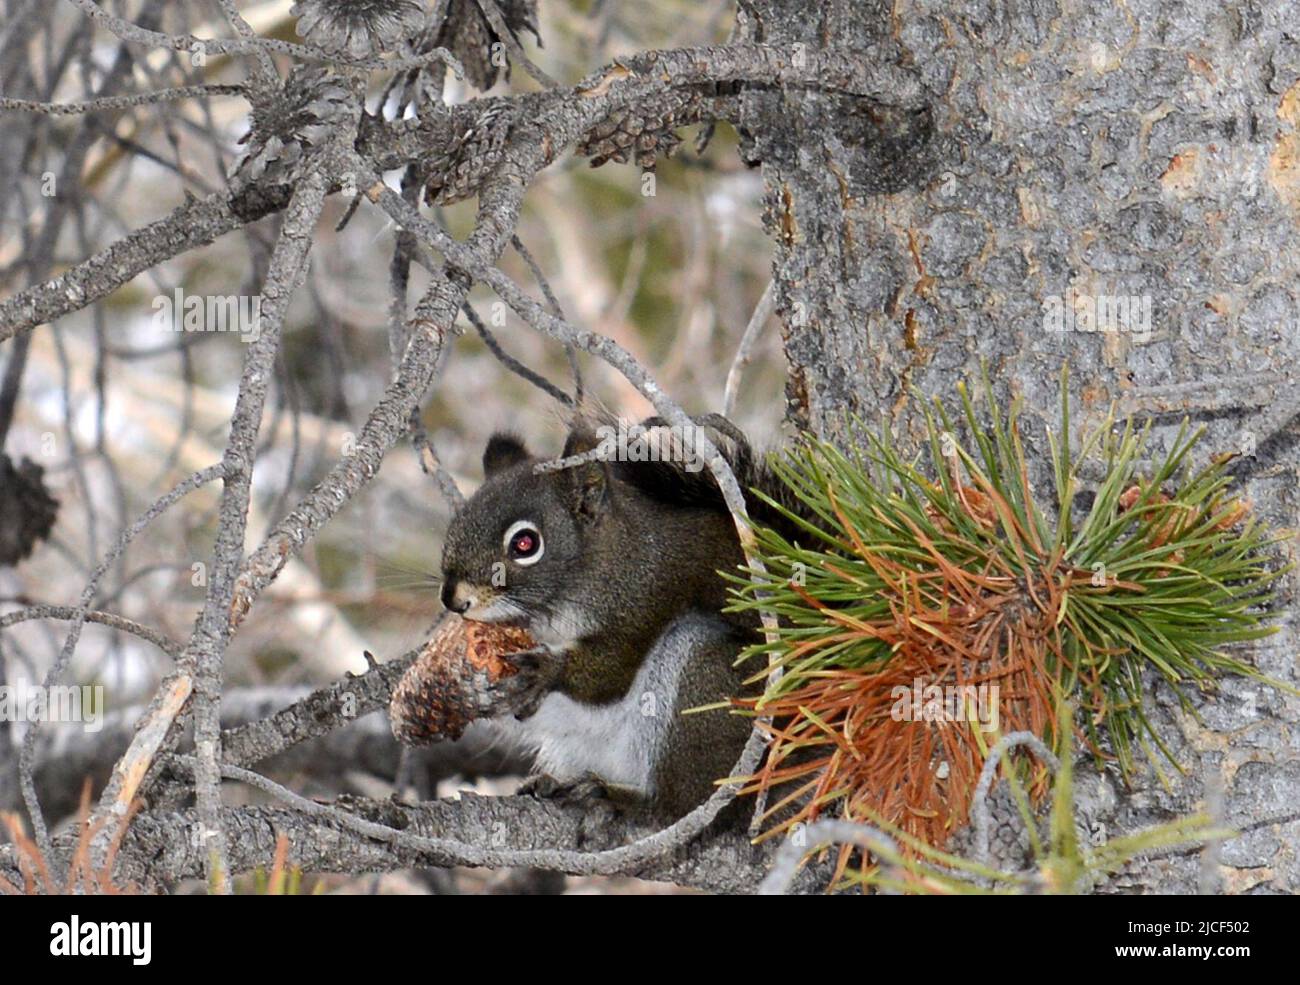 A cute Squirrel on a tree by the Provo river in the Mirror lake area in Kamas, Utah, USA. Stock Photo